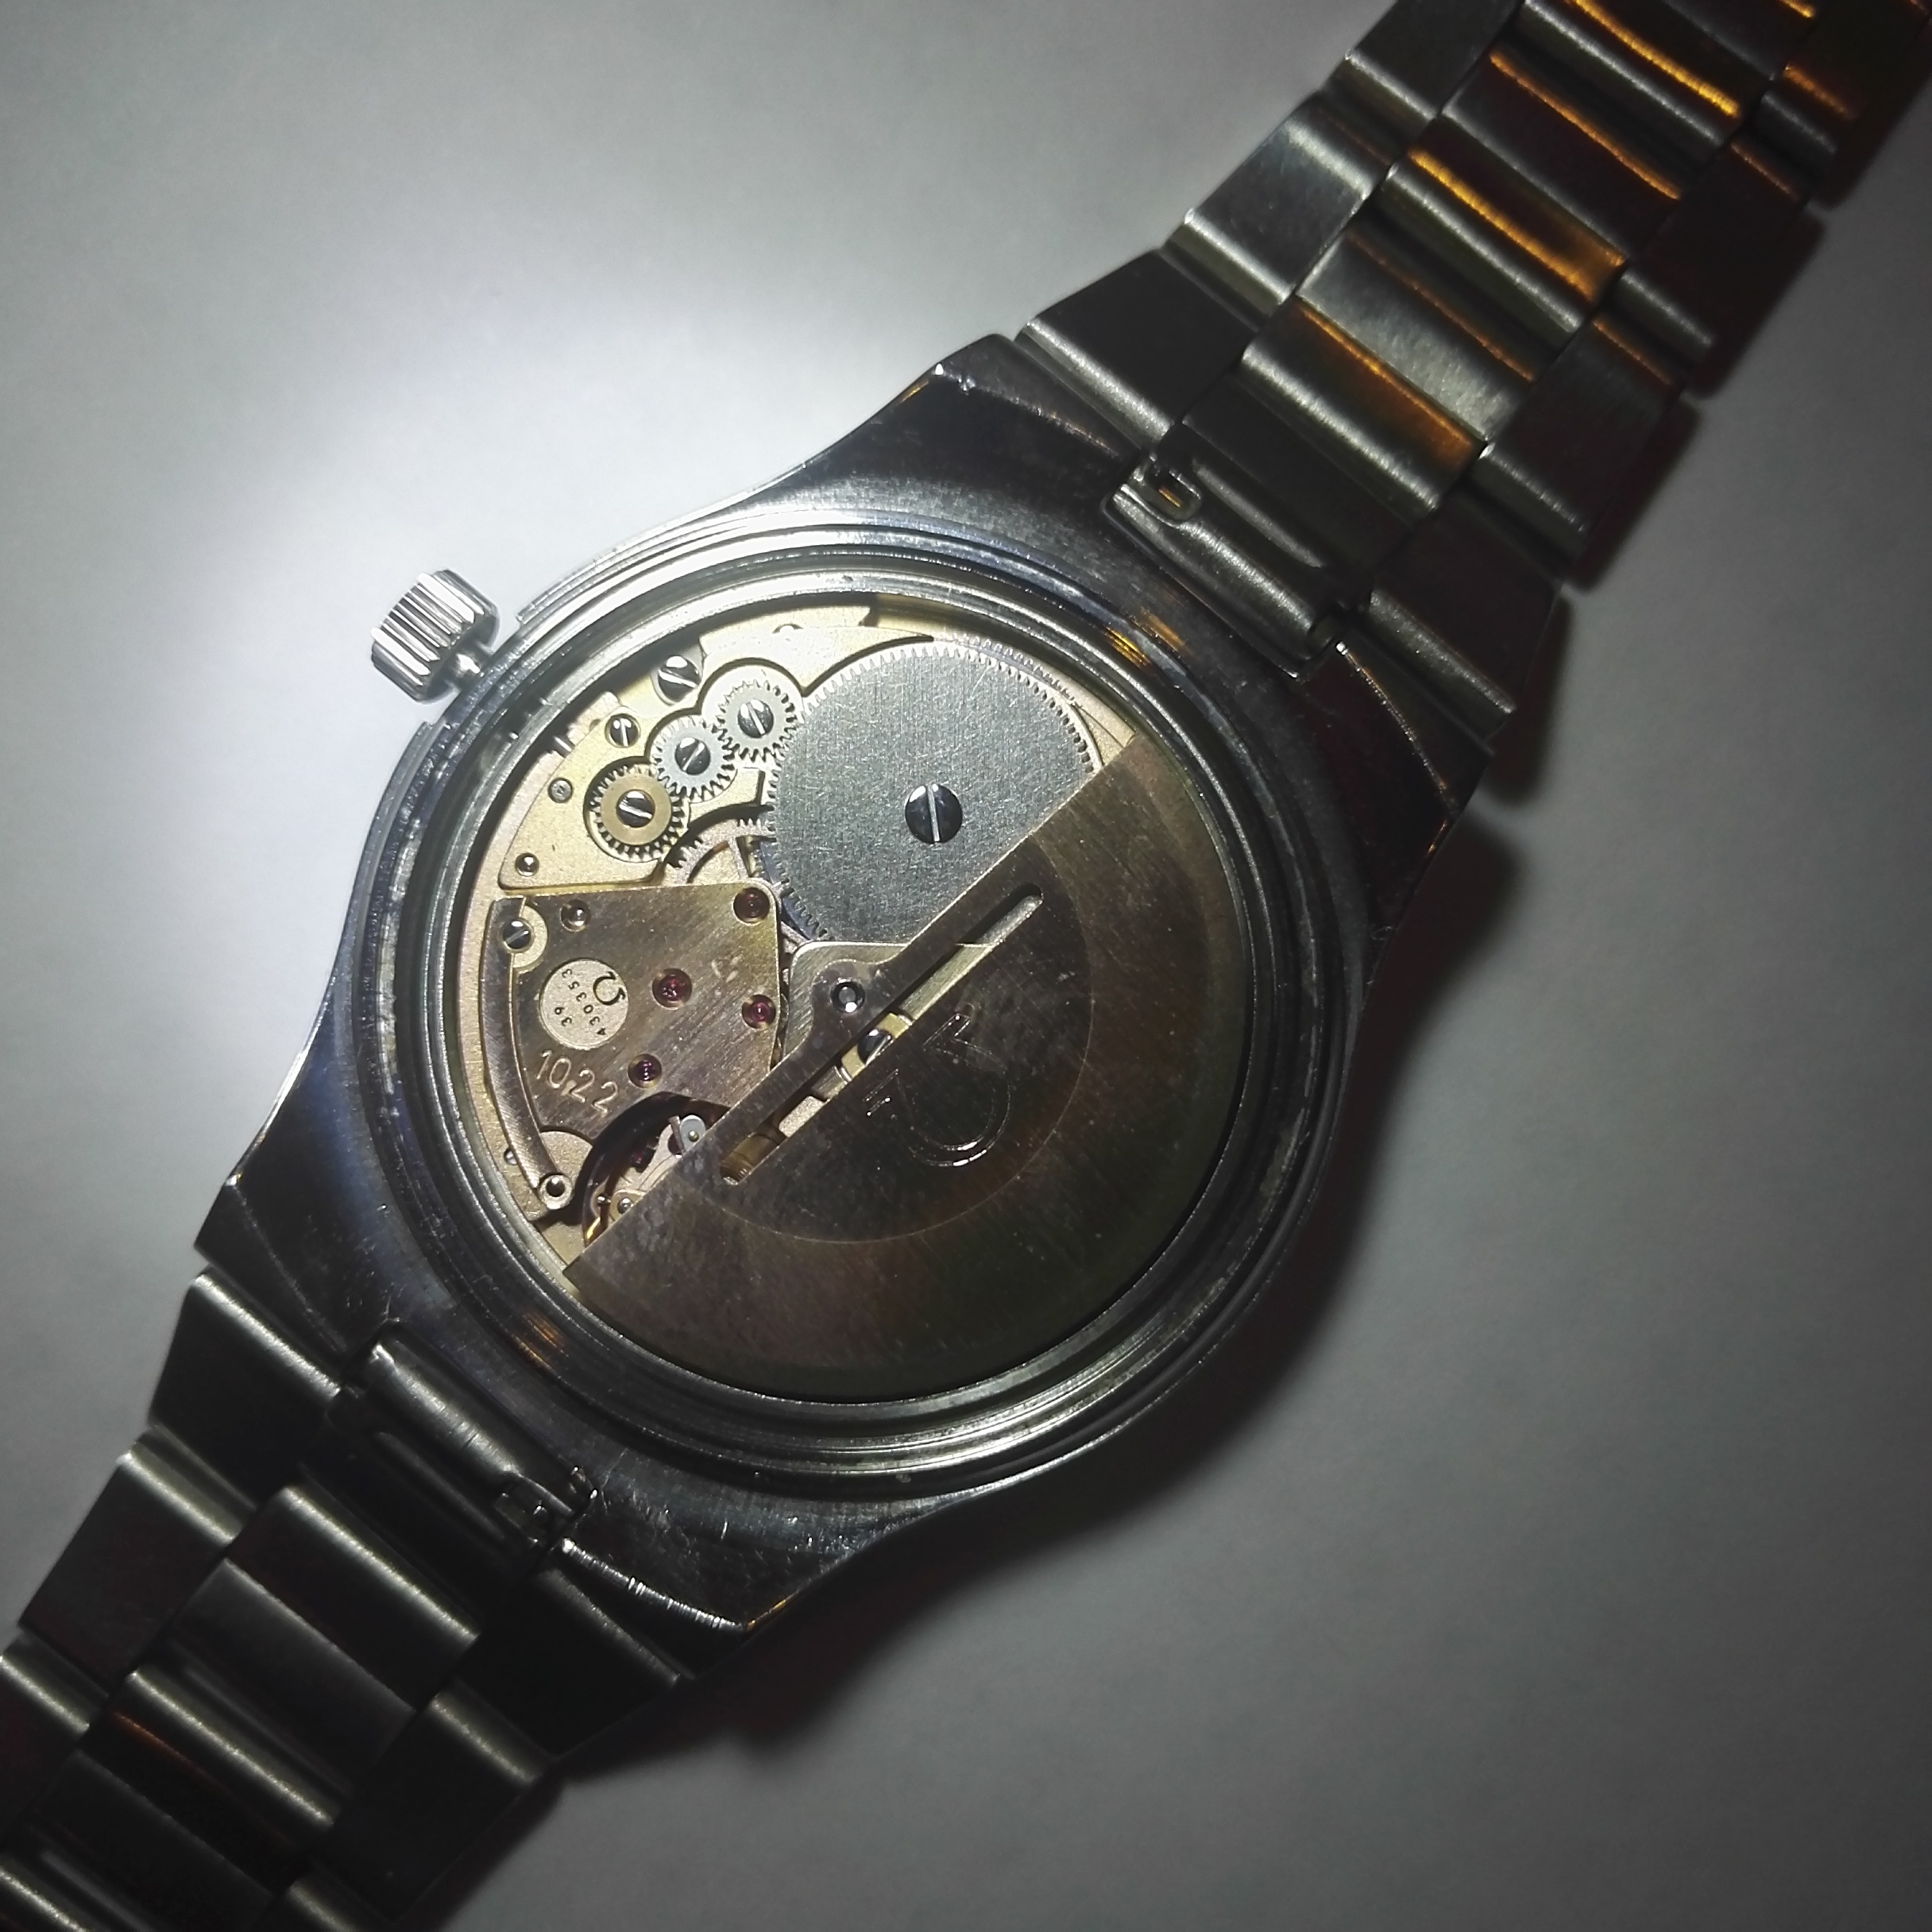 Original or not? Omega Geneve cal. 1022 from 70's | Omega Forums